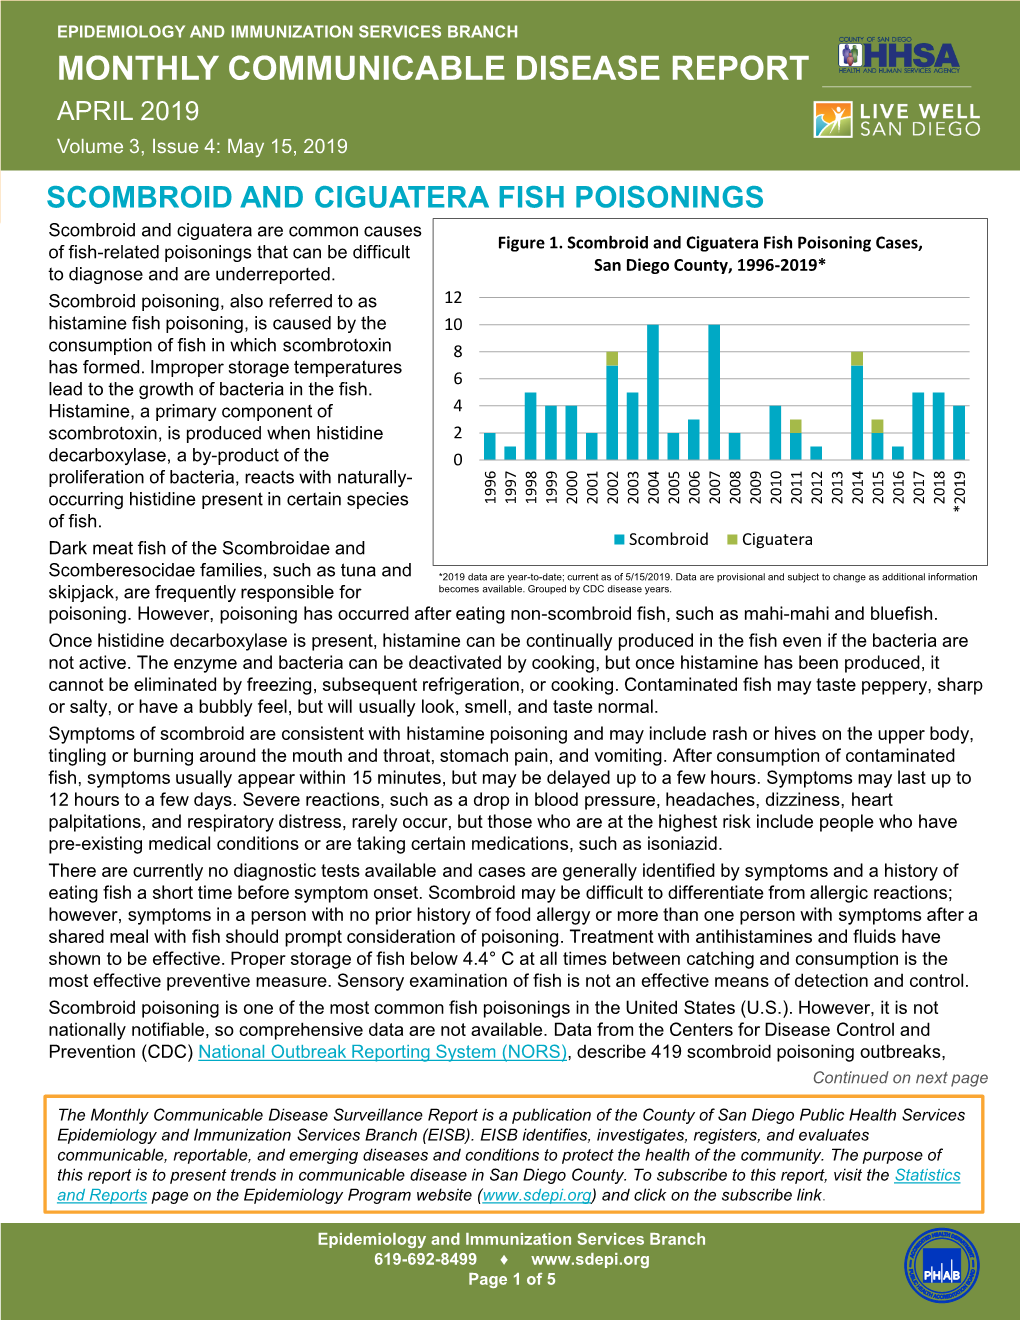 SCOMBROID and CIGUATERA FISH POISONINGS Scombroid and Ciguatera Are Common Causes of Fish-Related Poisonings That Can Be Difficult Figure 1